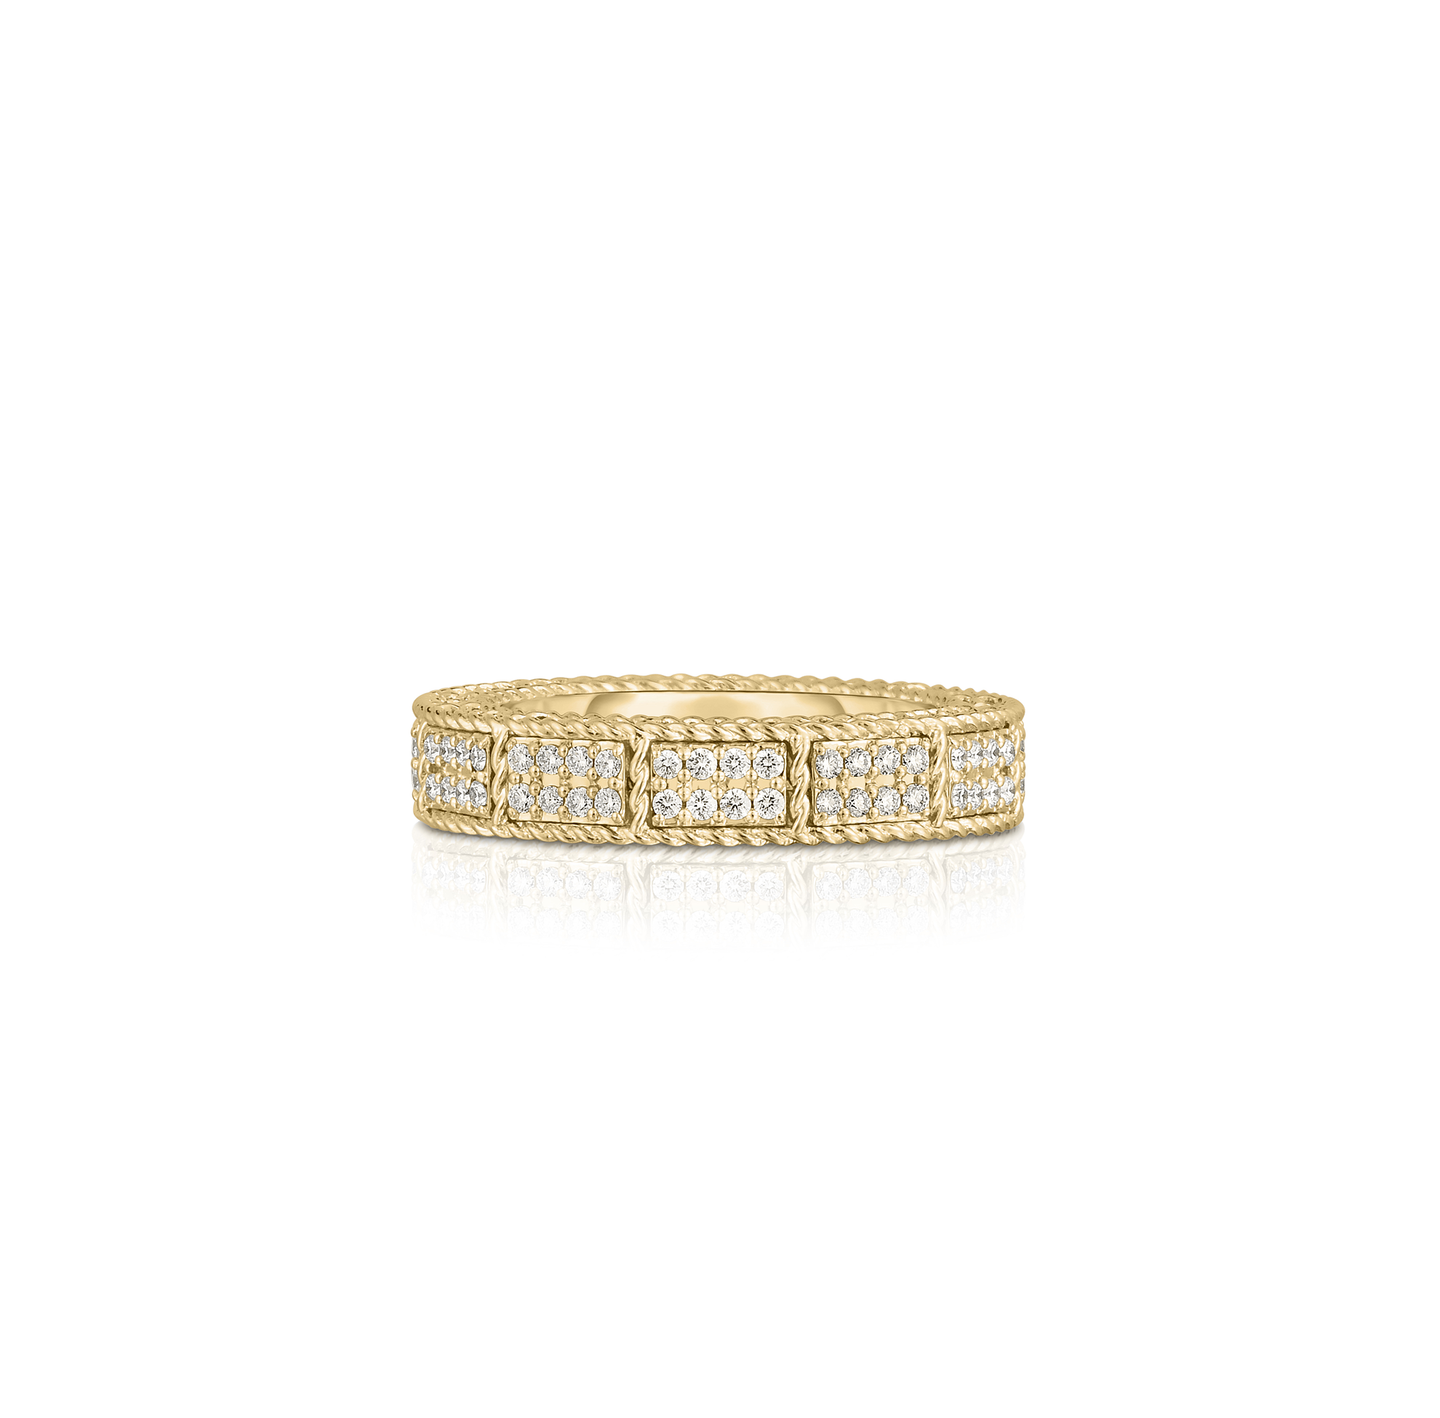 Roberto Coin Mosaic 18K Yellow Gold Ring with Diamonds